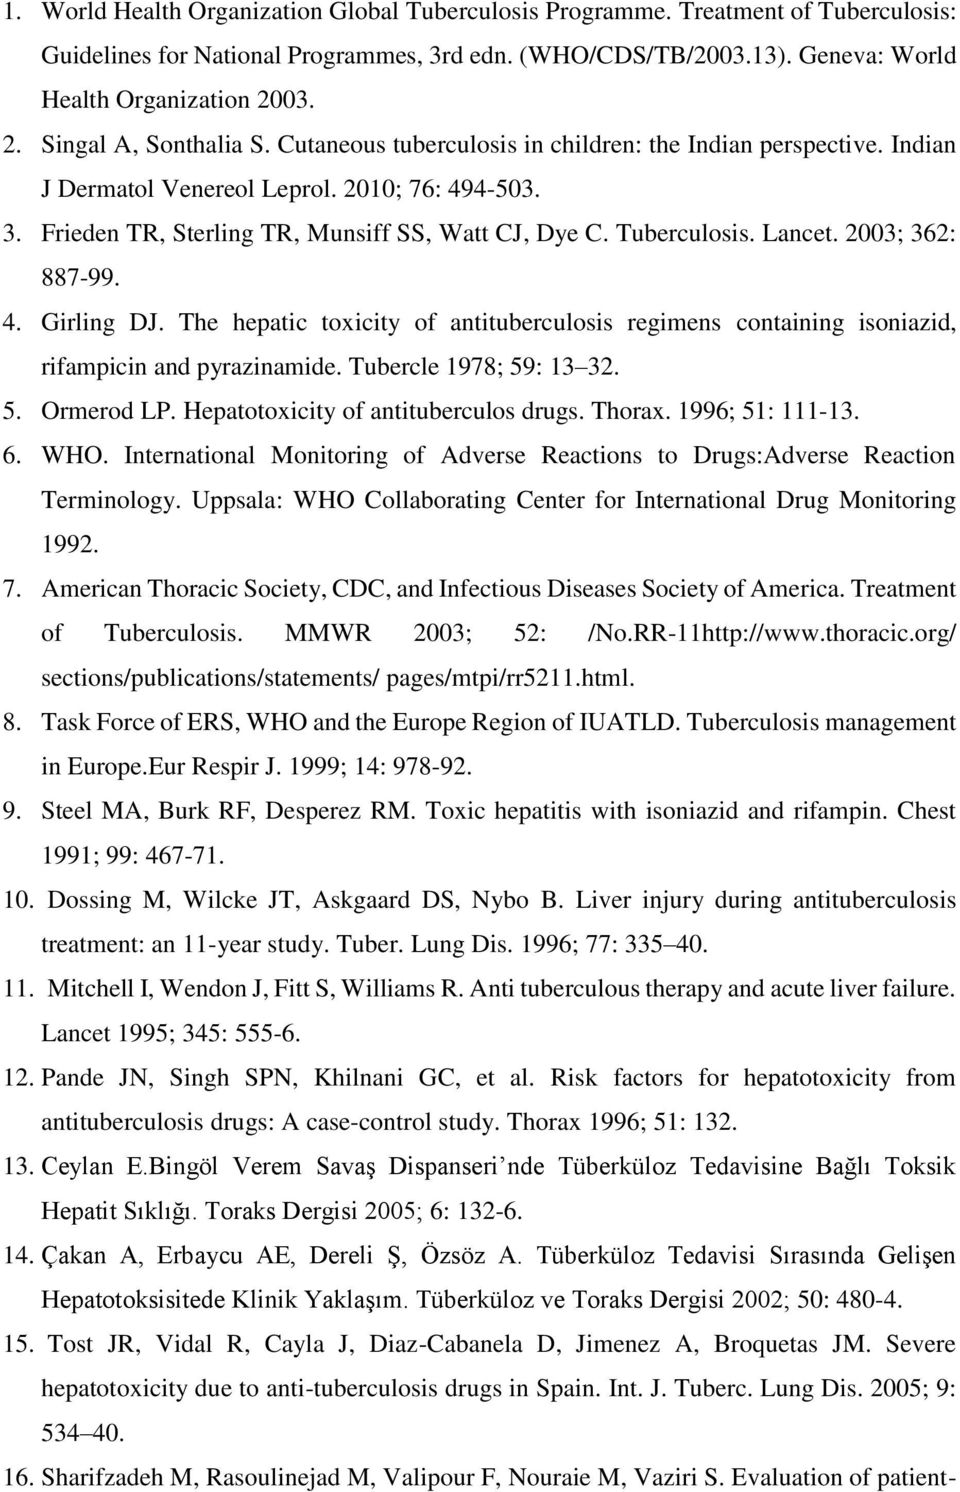 Tuberculosis. Lancet. 2003; 362: 887-99. 4. Girling DJ. The hepatic toxicity of antituberculosis regimens containing isoniazid, rifampicin and pyrazinamide. Tubercle 1978; 59: 13 32. 5. Ormerod LP.